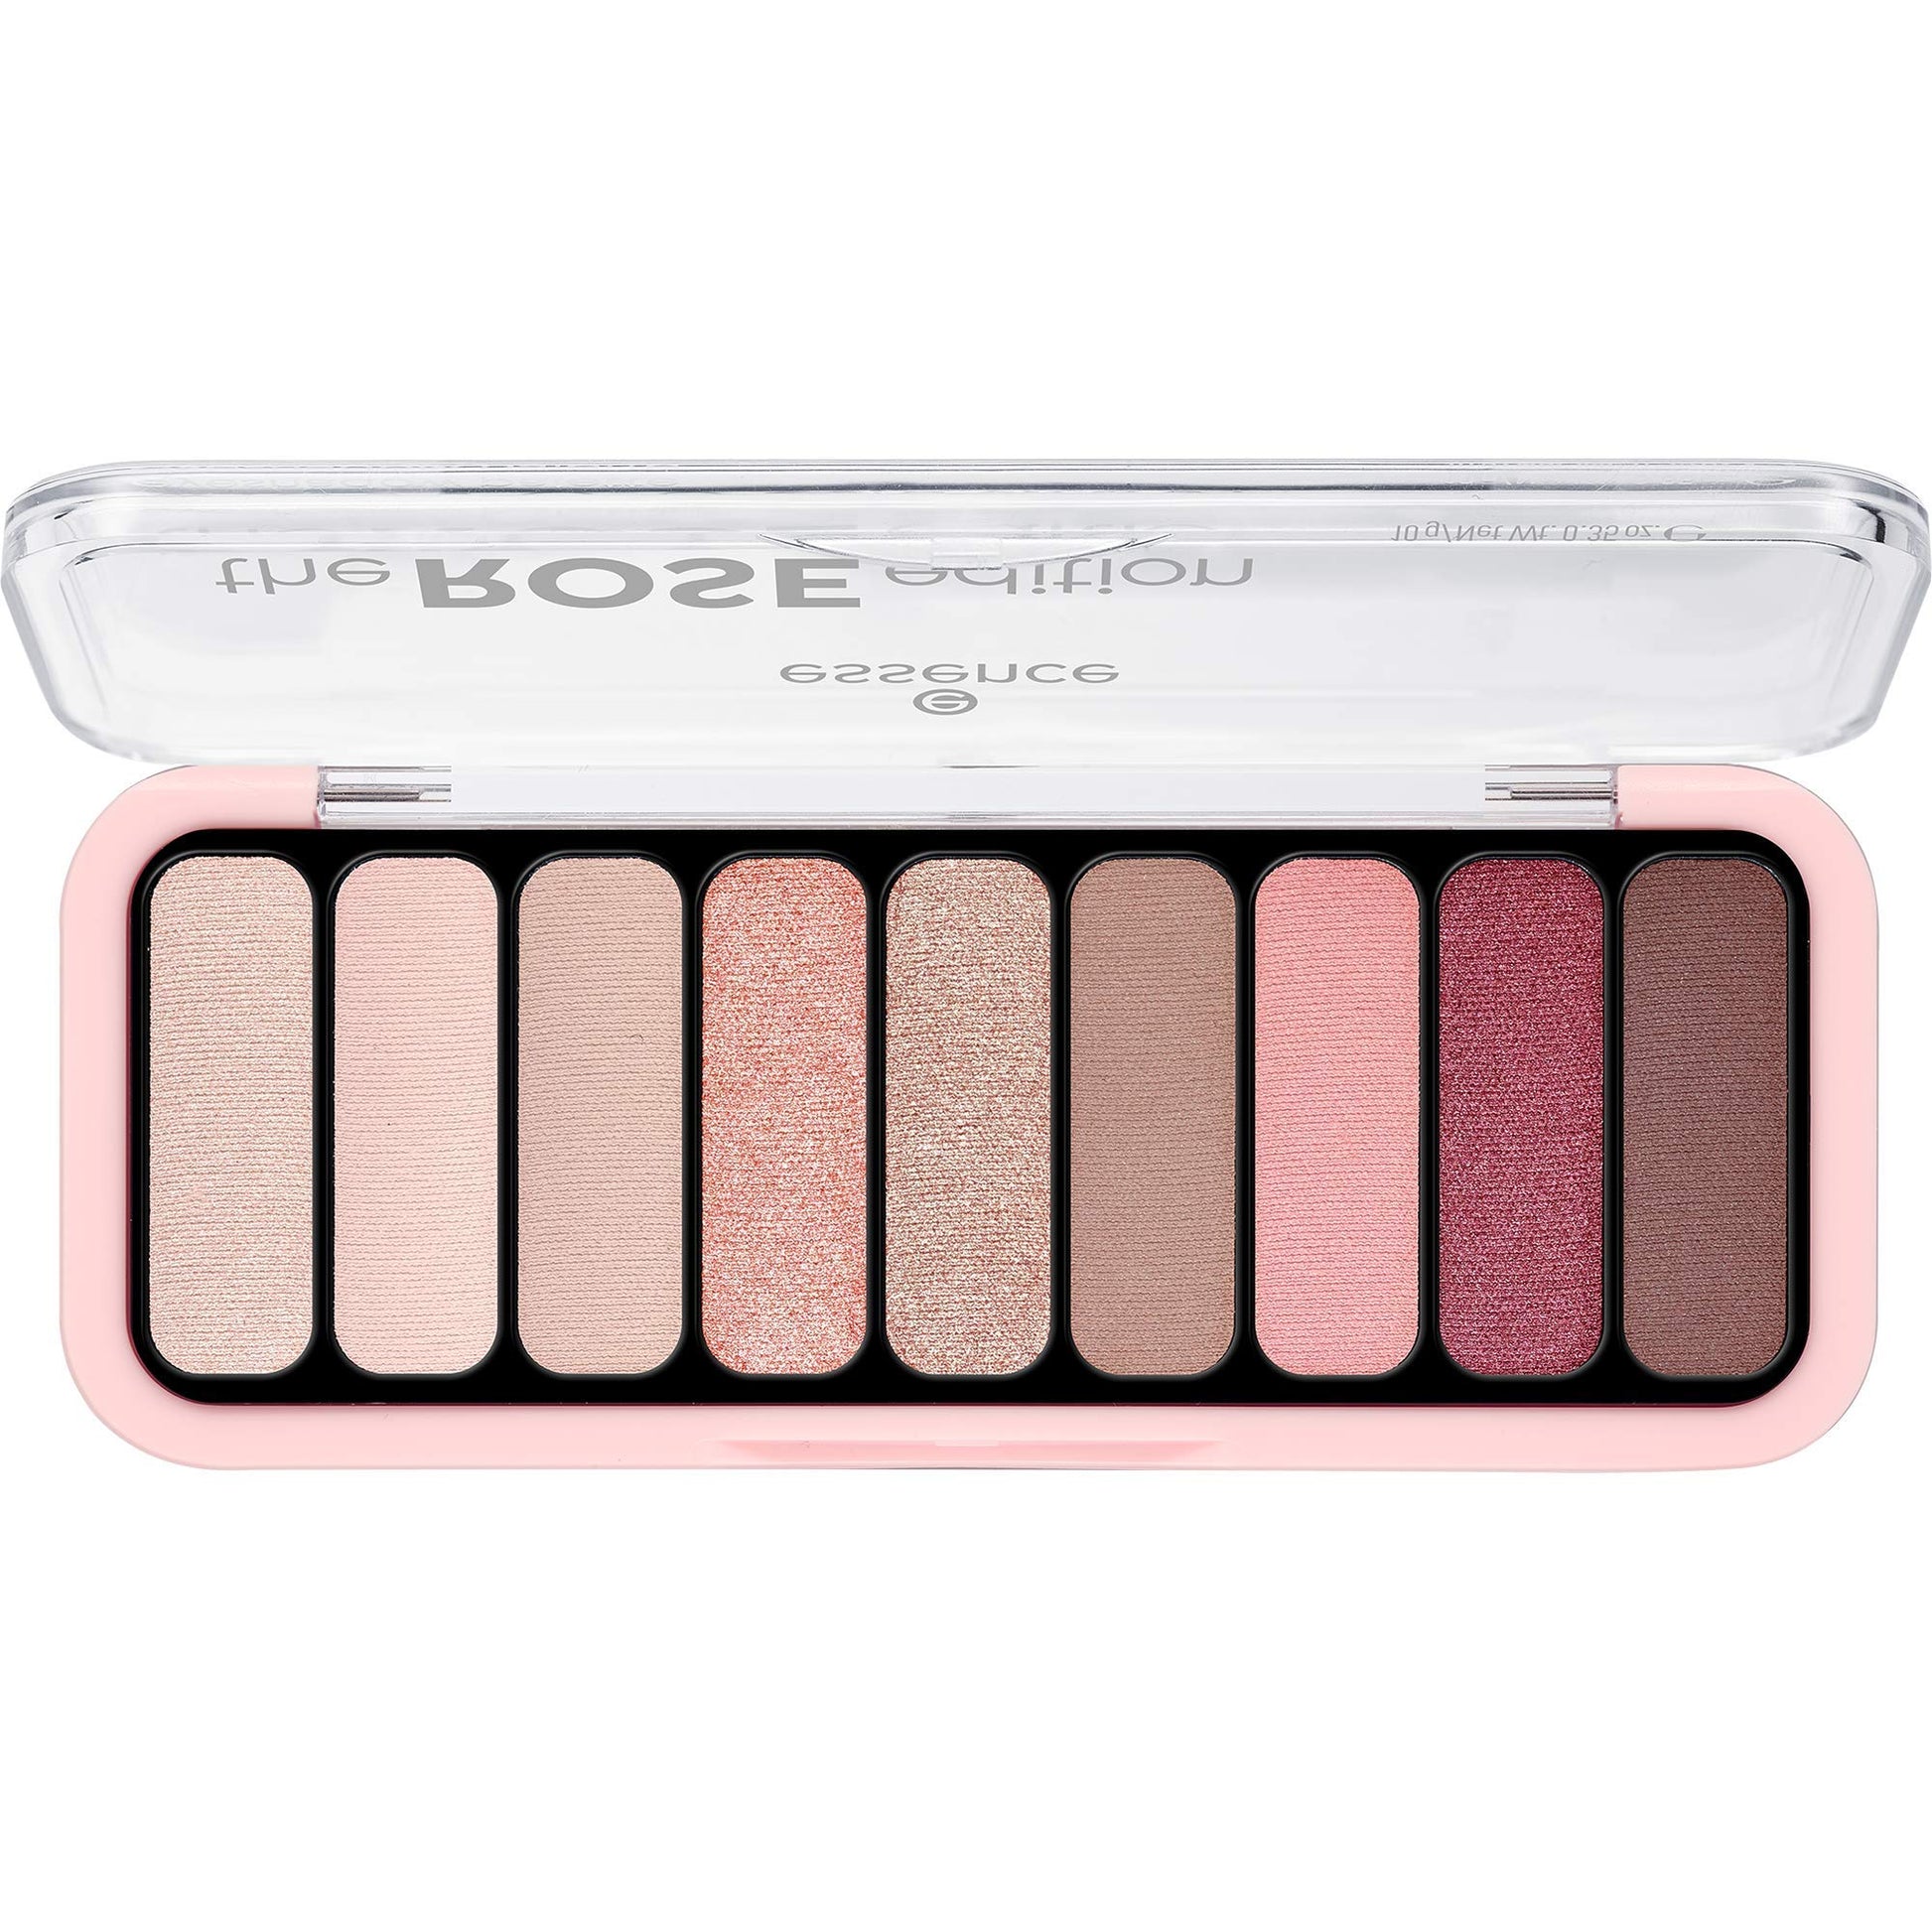 Essence the ROSE edition eyeshadow palette 20 Lovely In Rose 